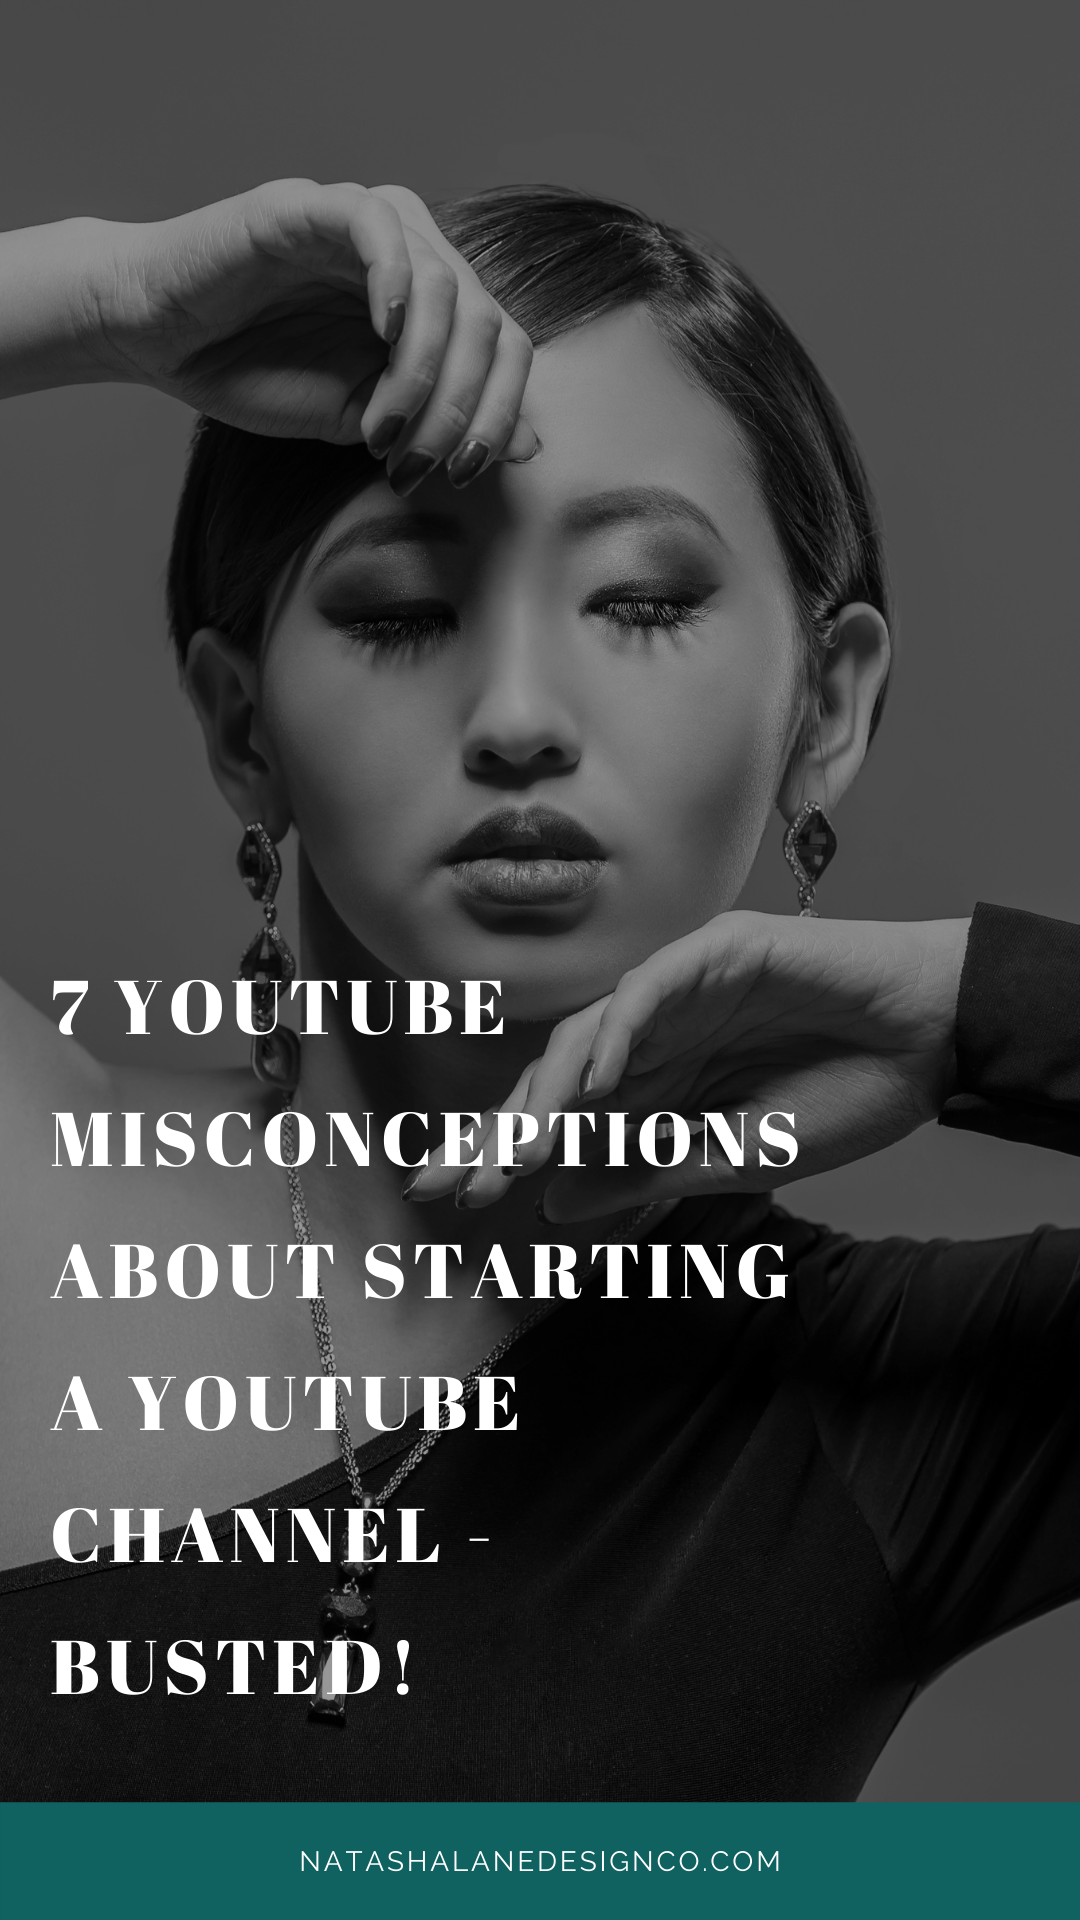 7 YouTube misconceptions about starting a YouTube channel - busted! (2)